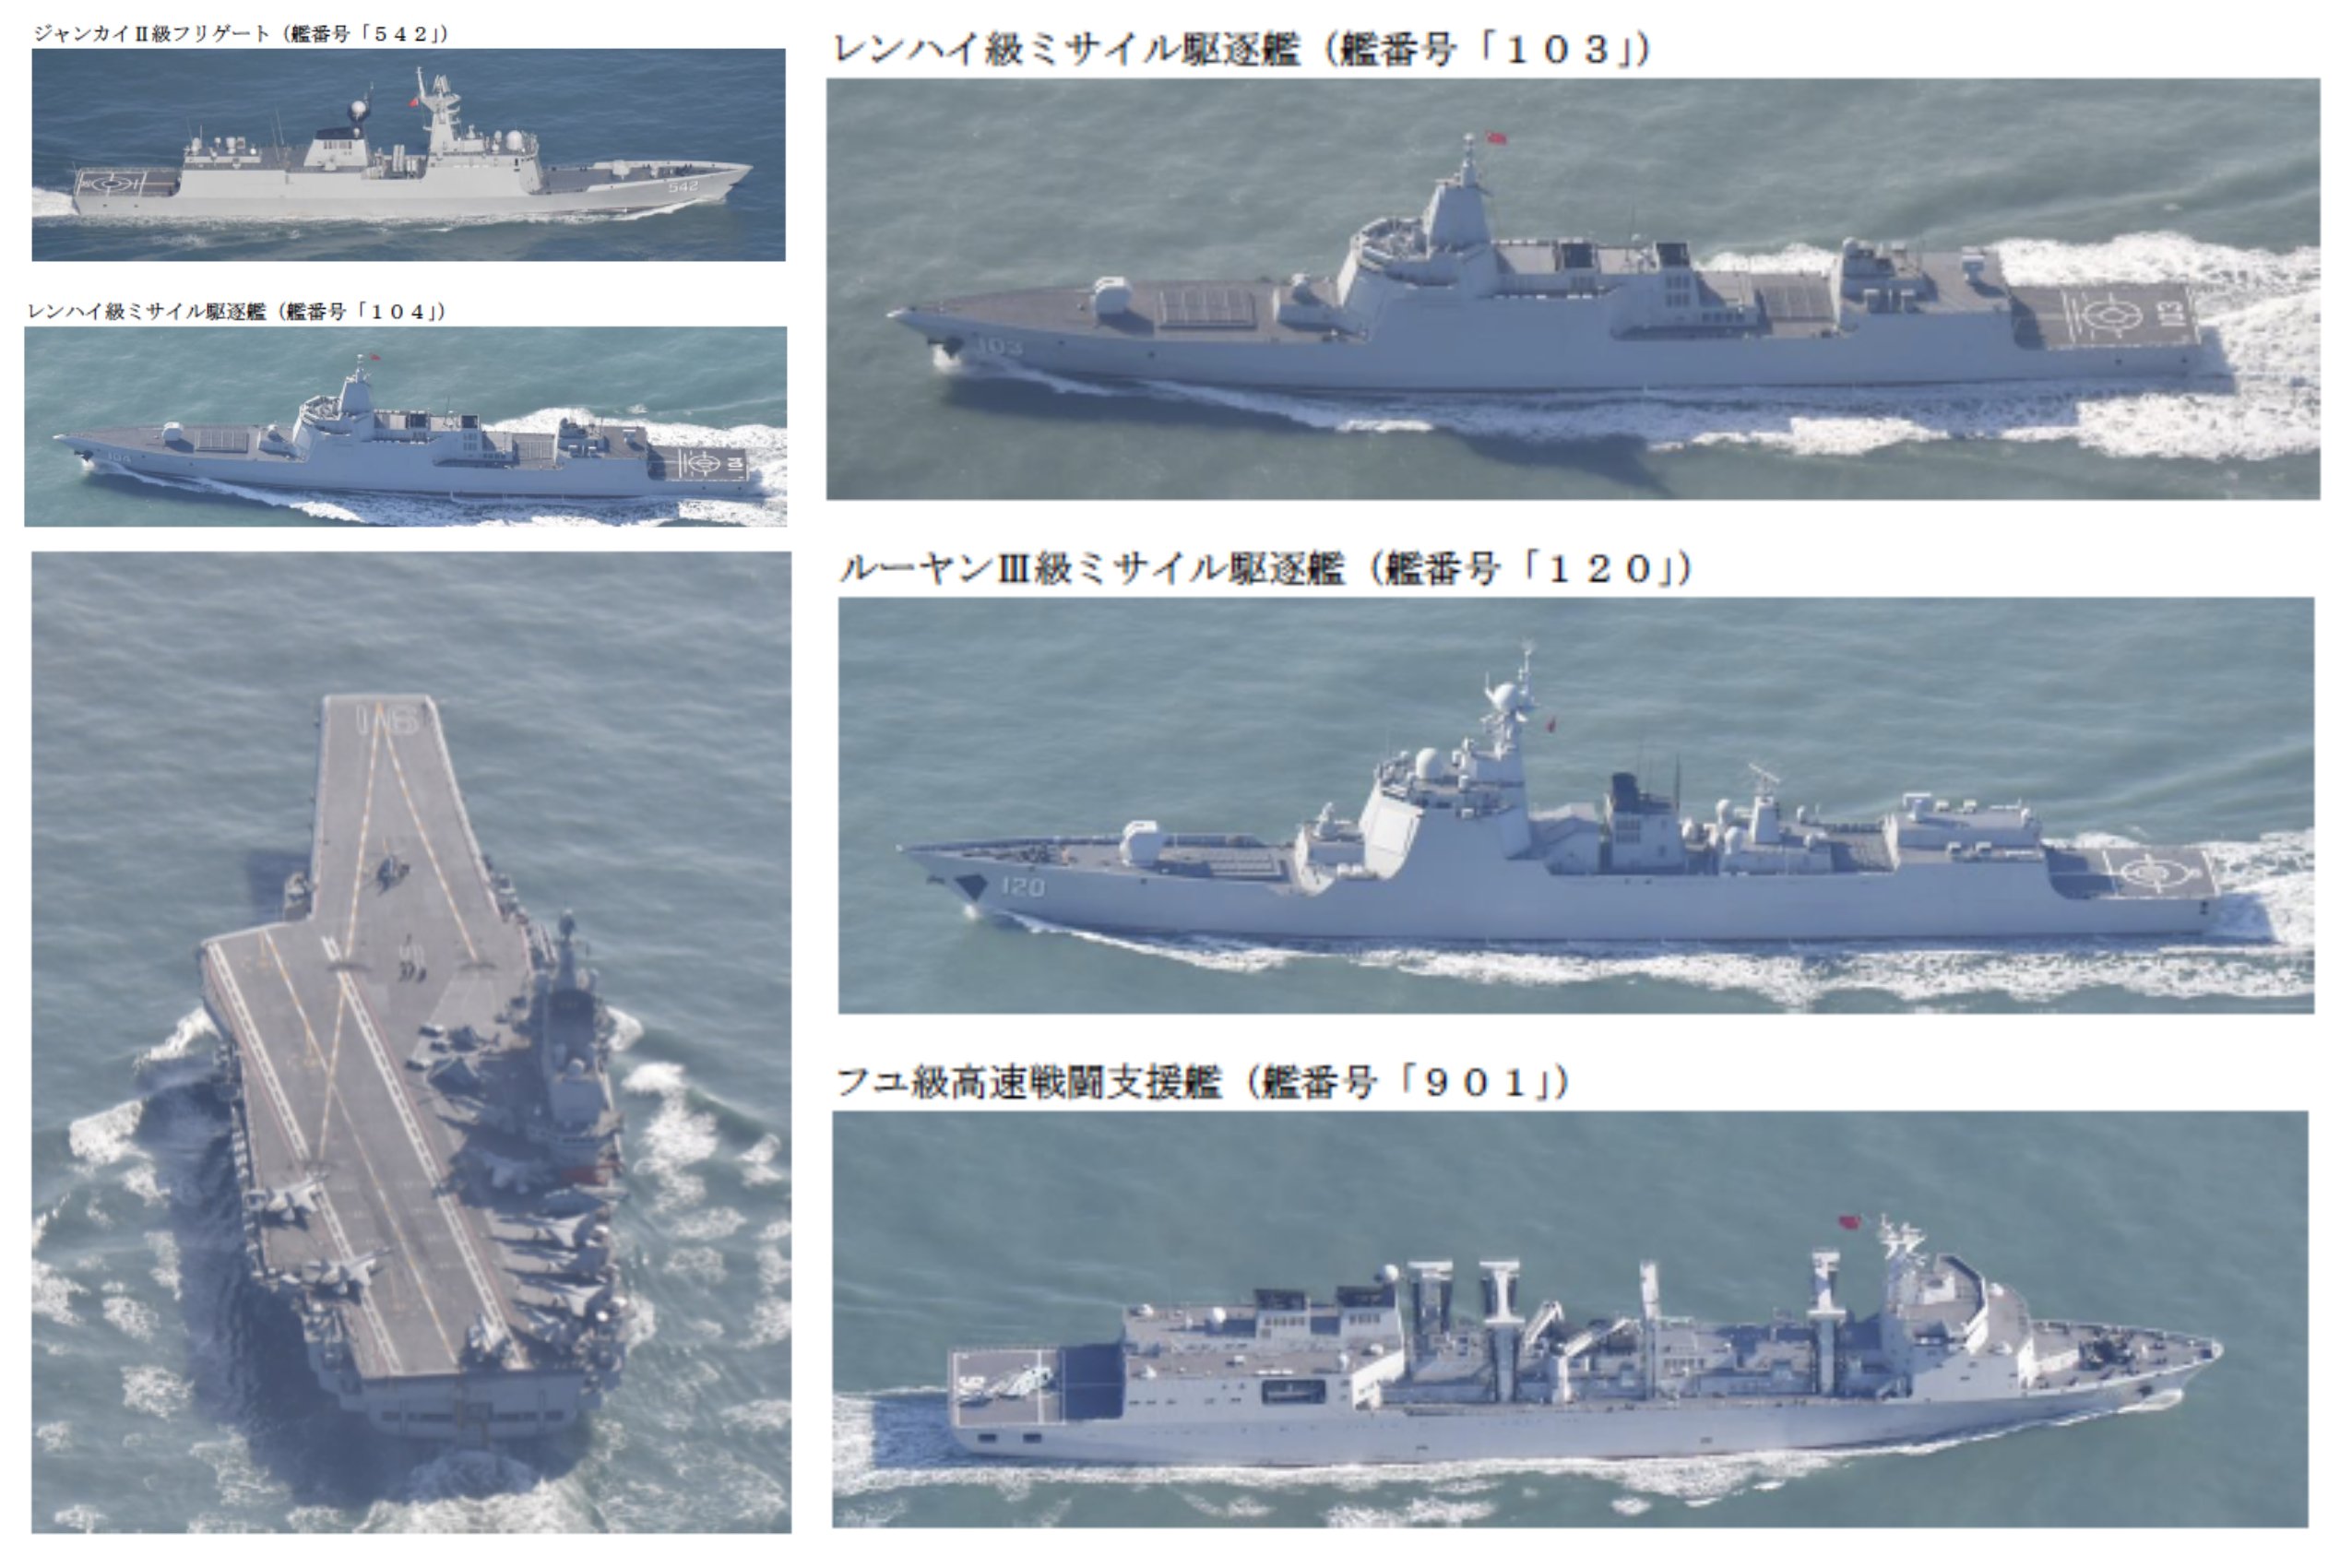 Chinese Liaoning Carrier Strike Group Now Operating In The Philippine Sea